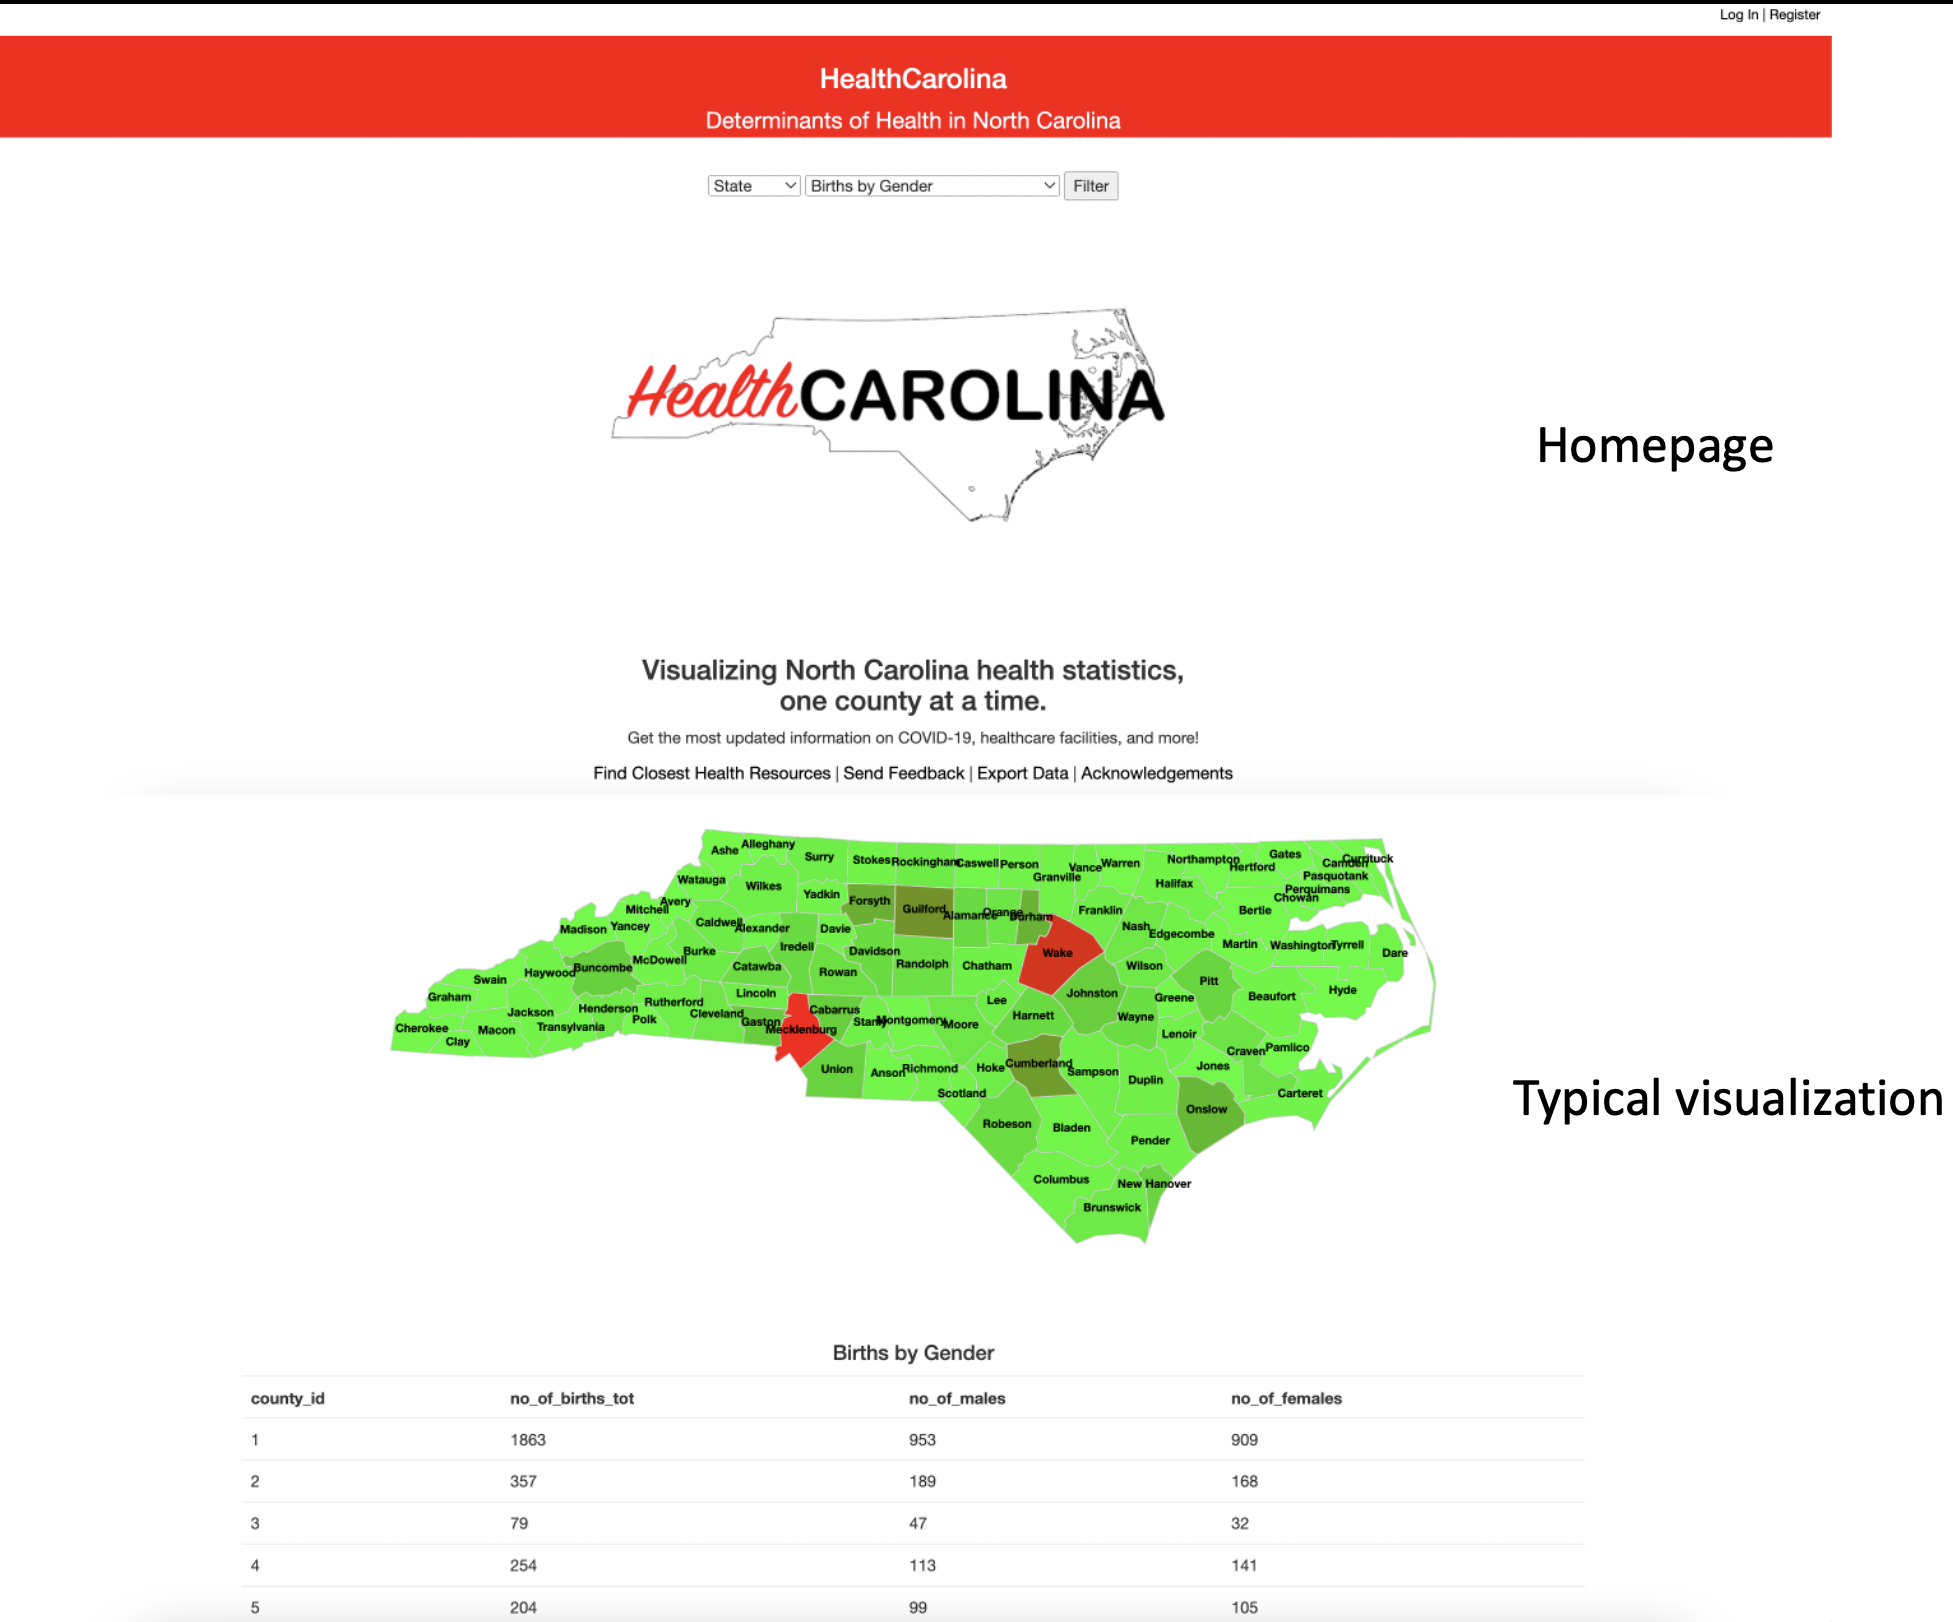 Two screenshots of HealthCarolina. The first screenshot is the homepage. The second screenshot labeled 'Typical visualization' shows a red and green chloropleth map of North Carolina representing births by county, with red areas (in this case Mecklenburg and Wake Counties) having higher birth rates.